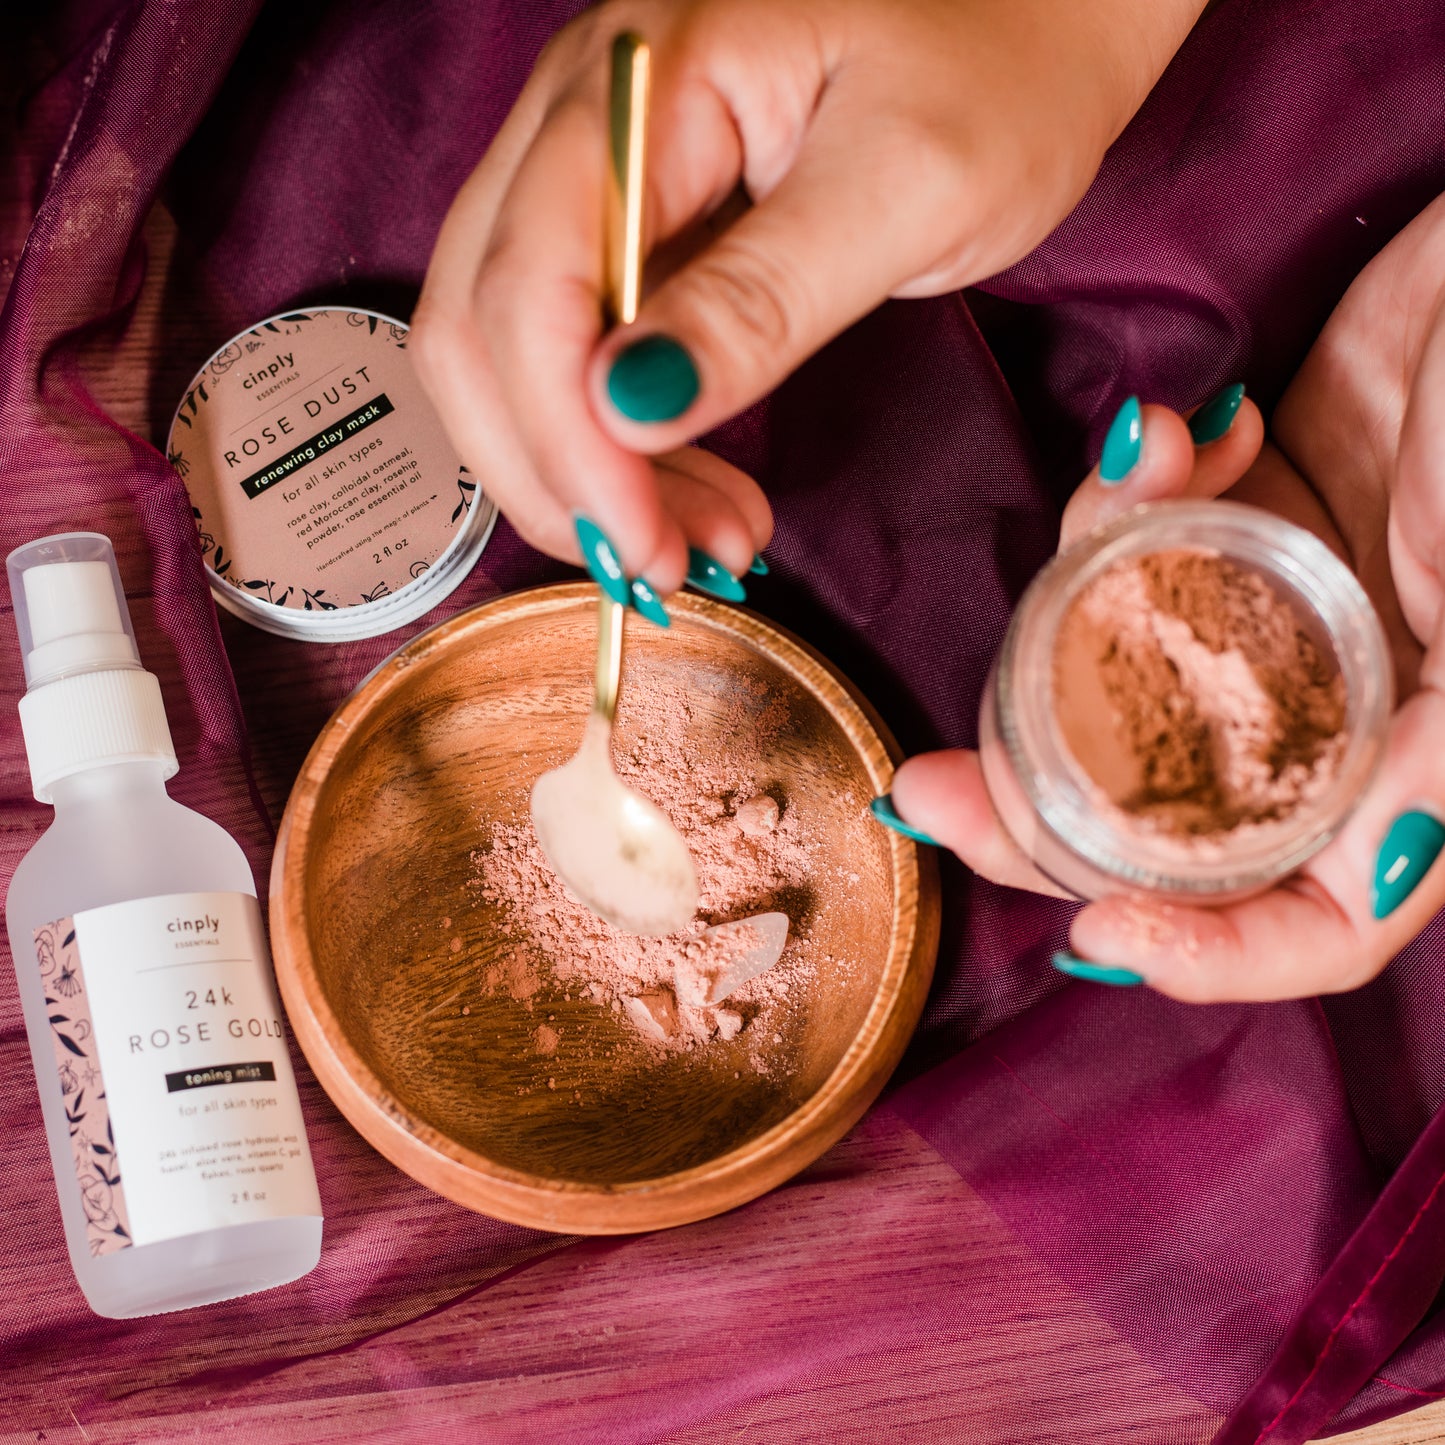 Rose Dust clay mask